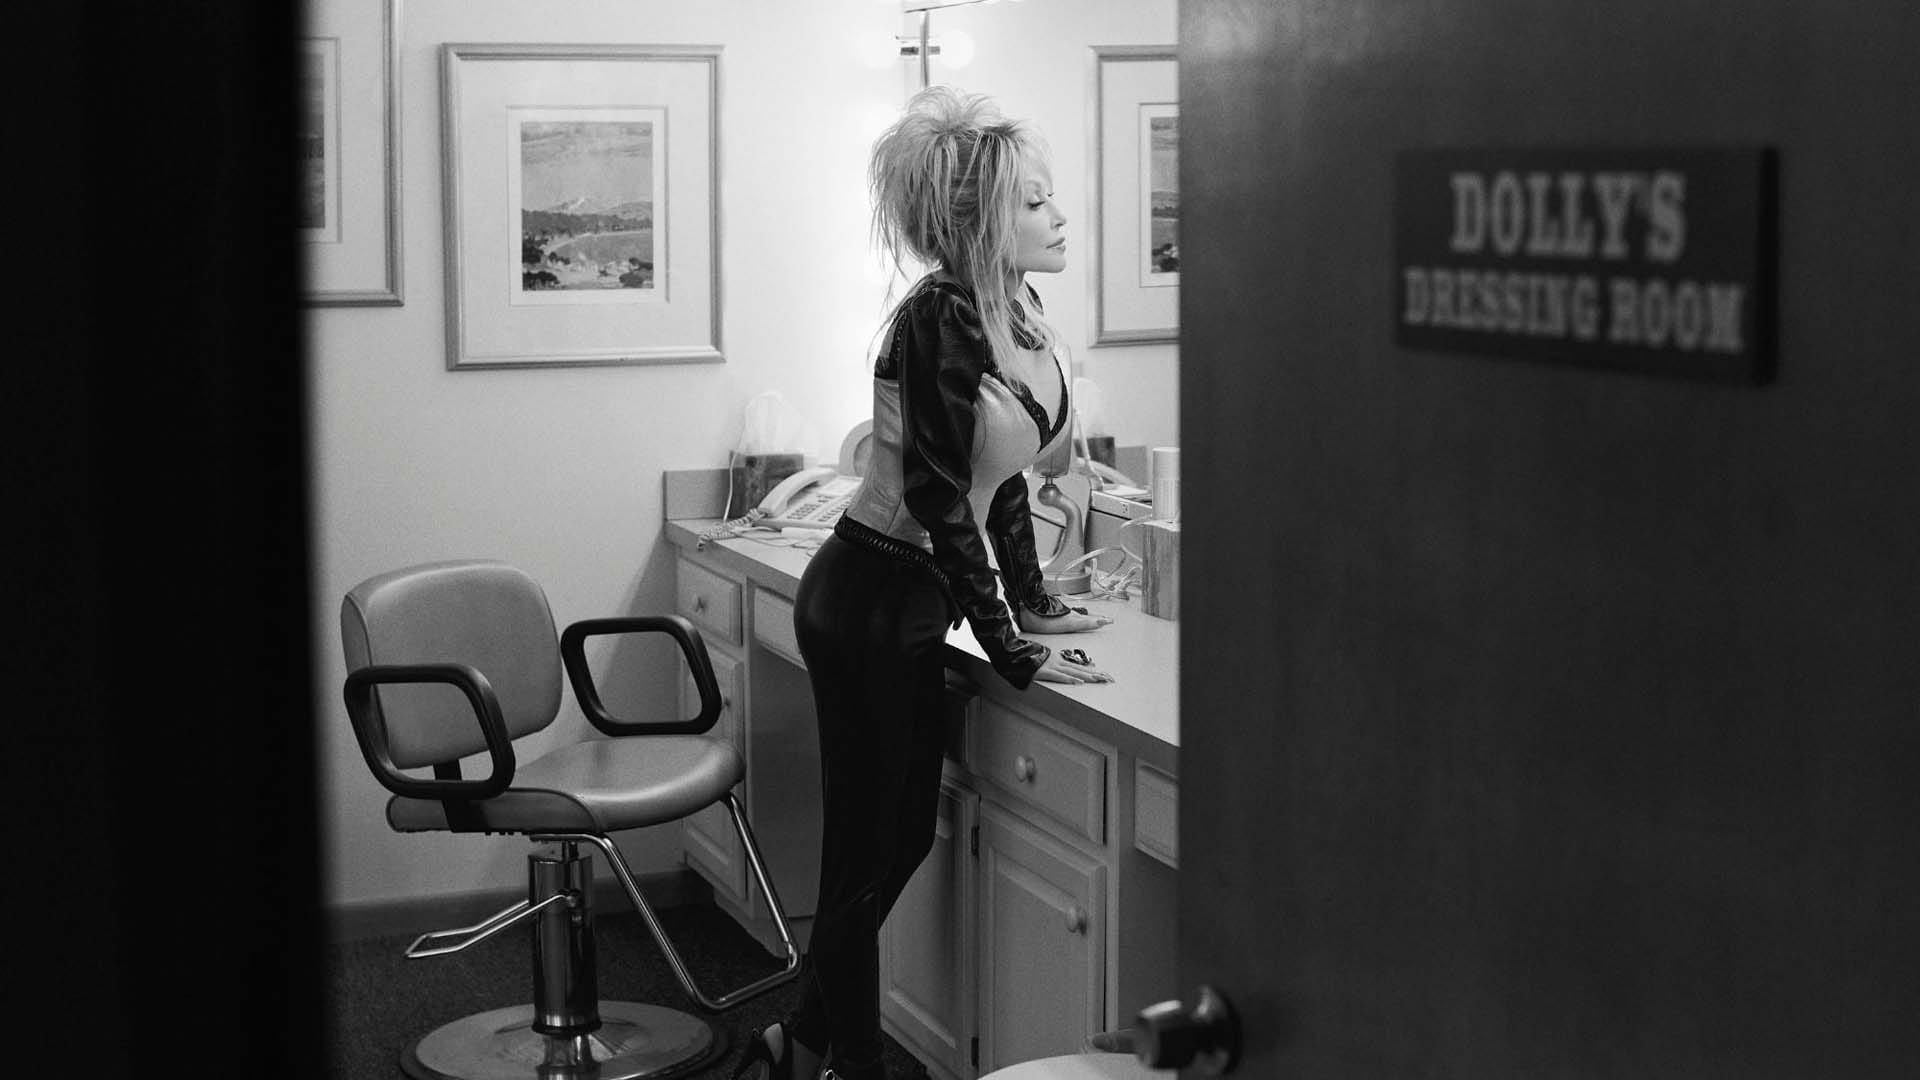 Dolly in her dressing room